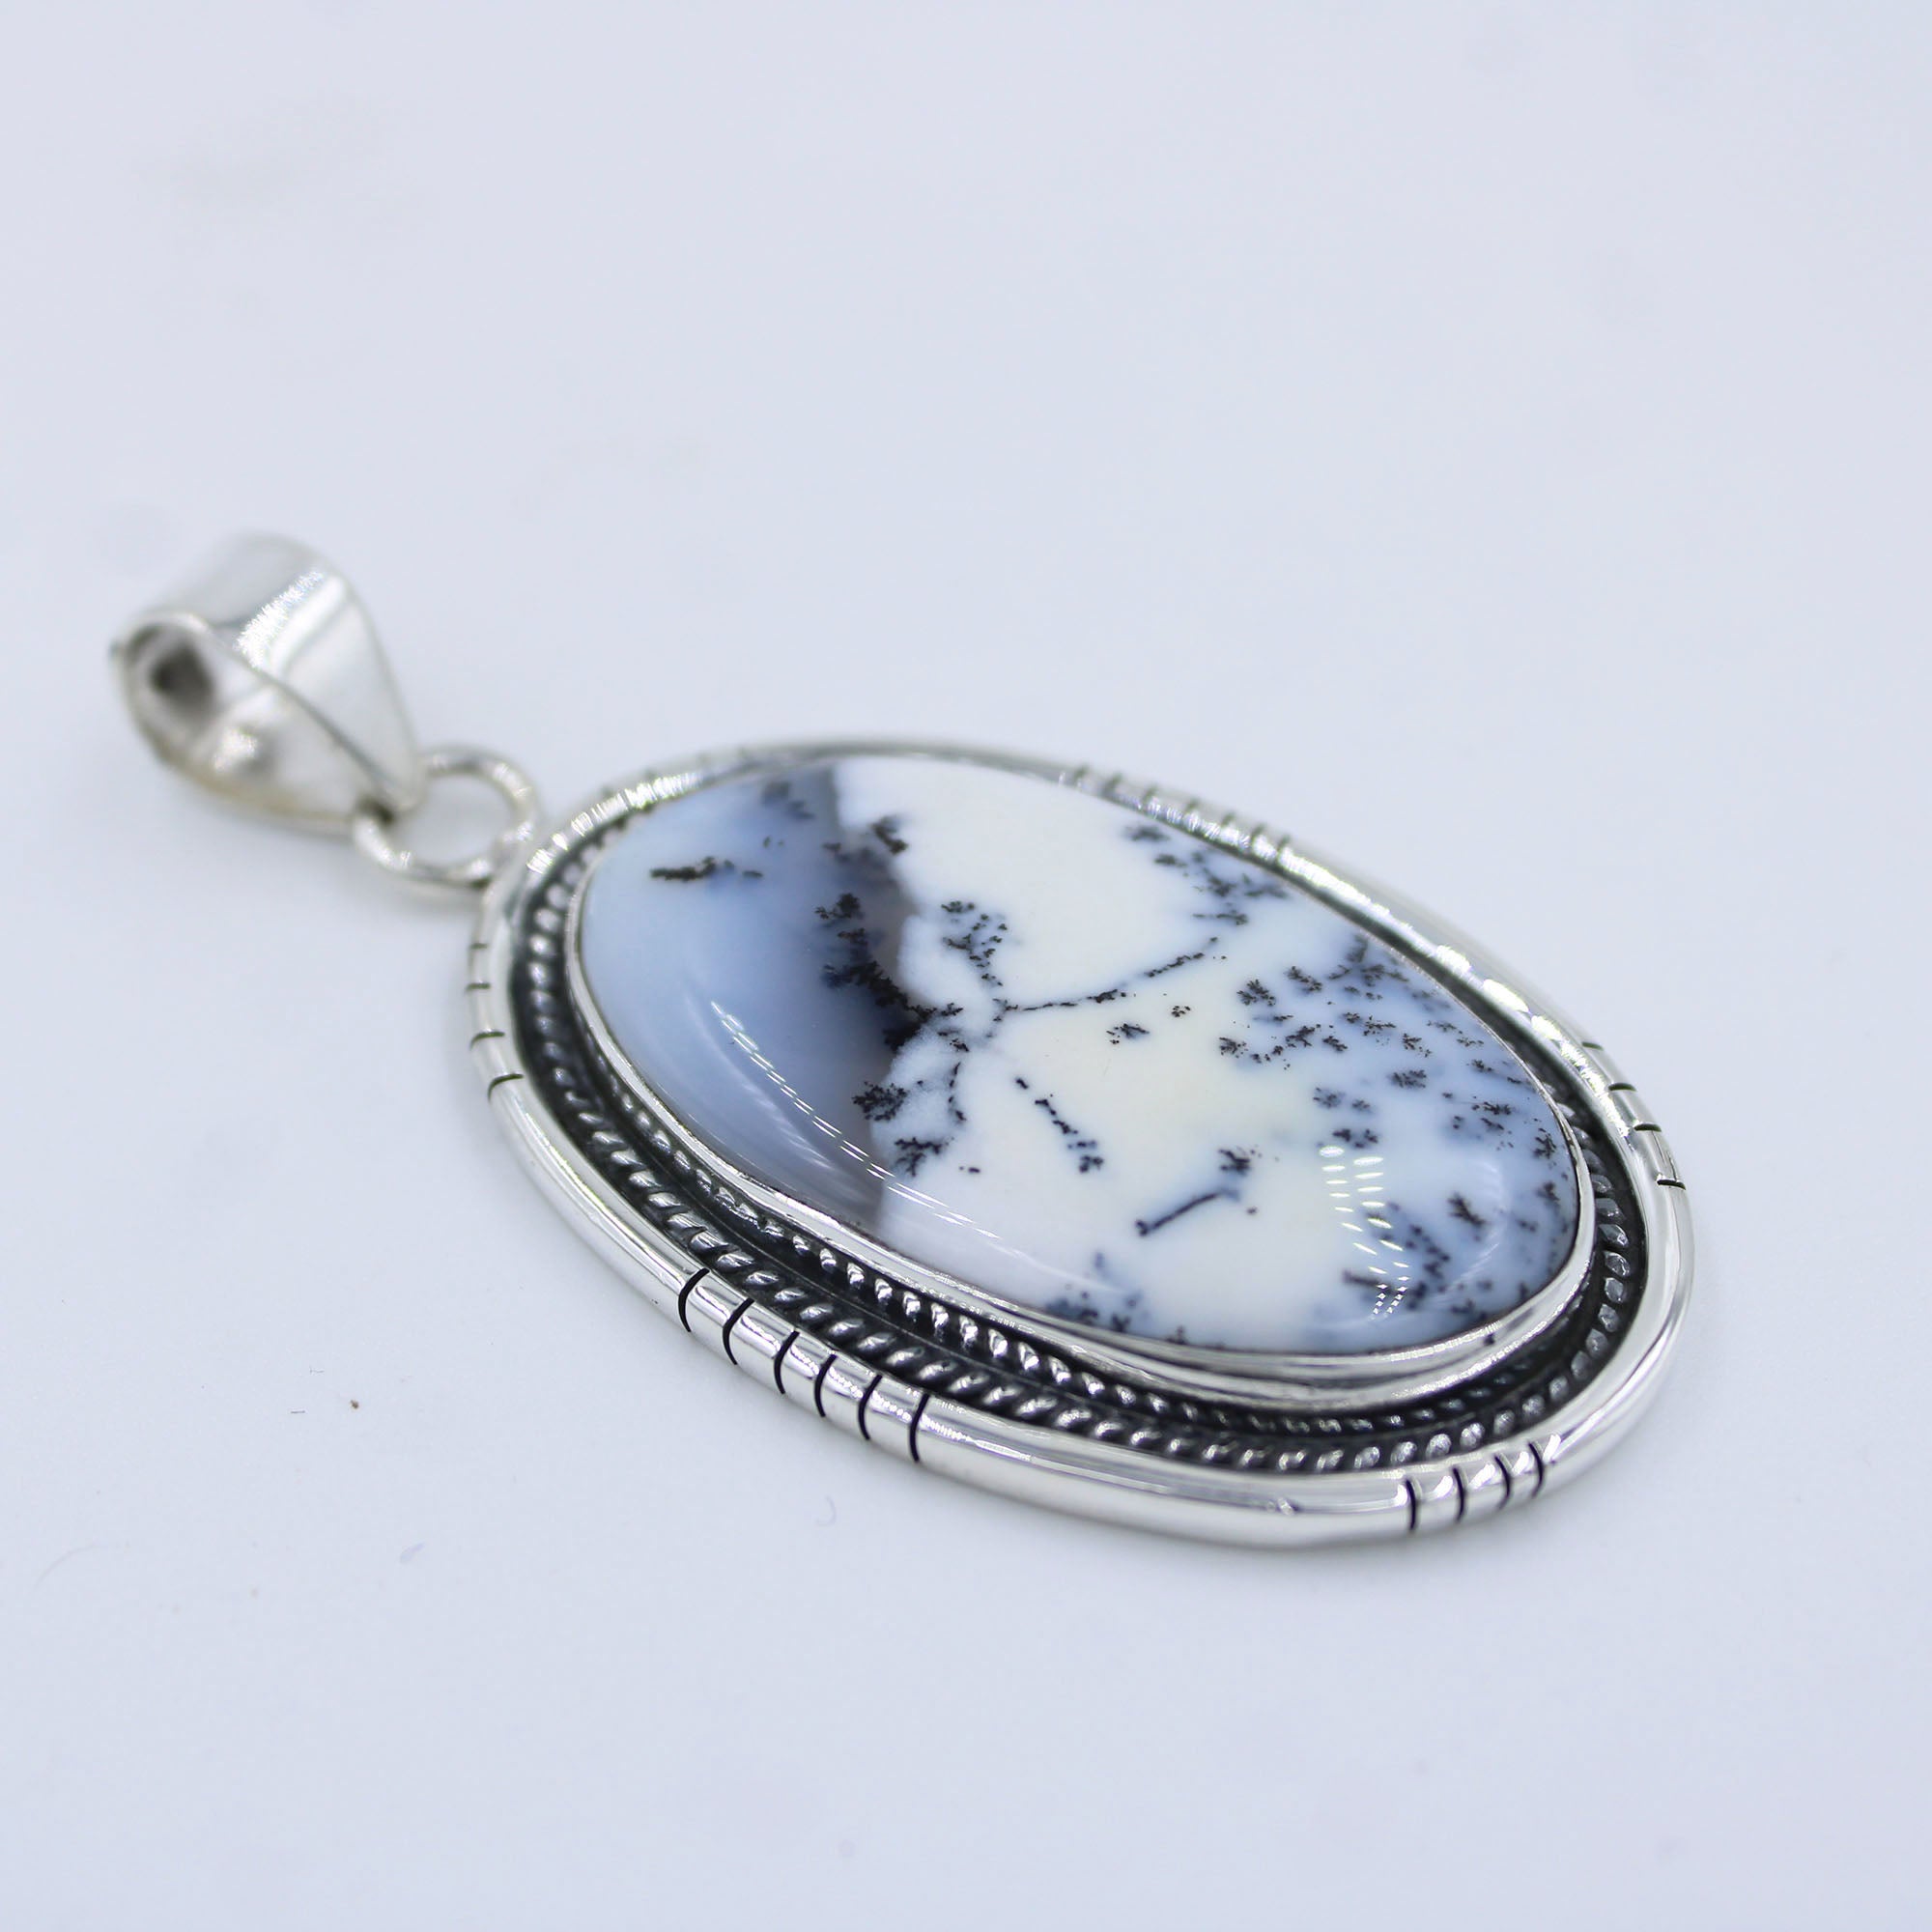 Black and White Agate Pendant - Dendritic Opal Silver Jewelry